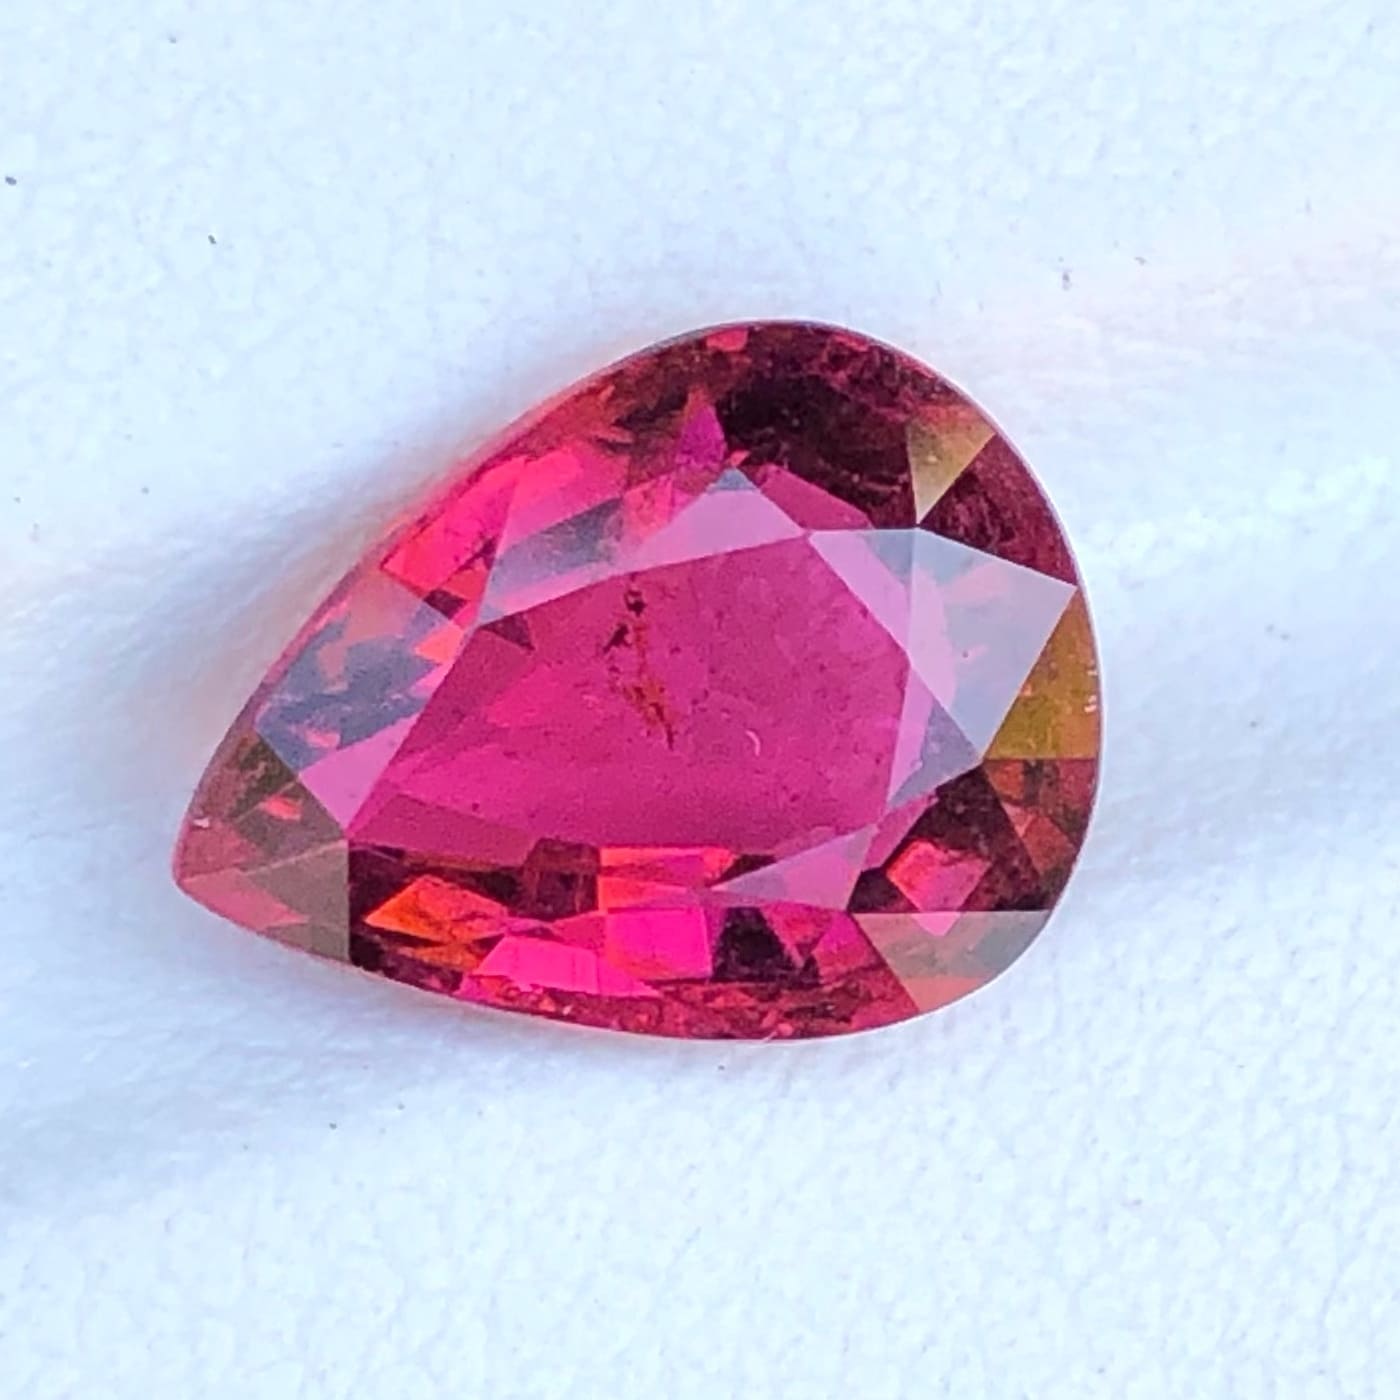 Buy 2.65 cts Loose Tourmaline Online